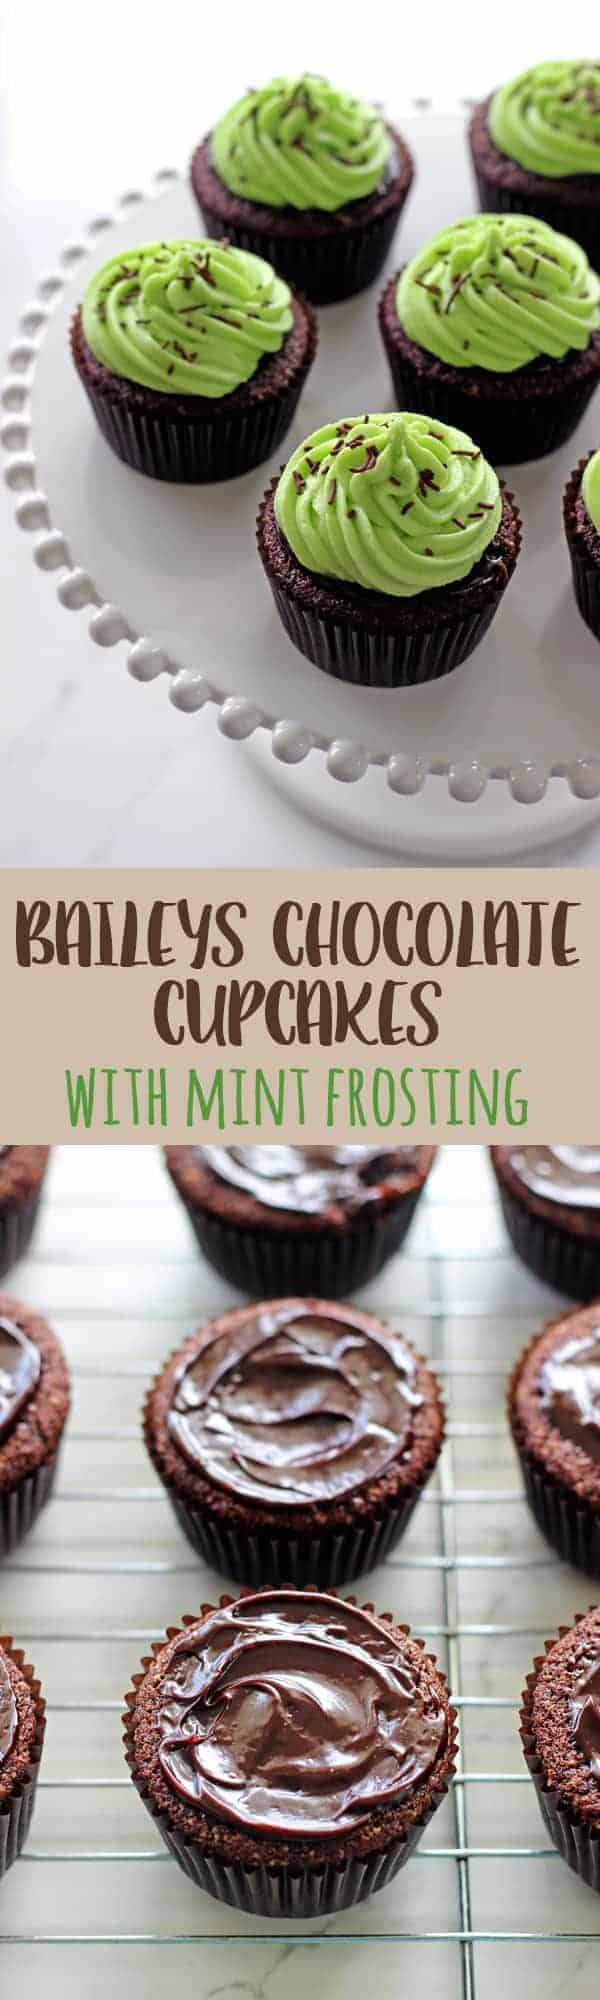 Celebrate St Patrick's Day with Chocolate Baileys Cupcakes with Mint Frosting - moist chocolate Baileys cupcakes, Baileys ganache and mint green frosting! #baileys #cupcakes #stpaddysday #stpatricksday #chocolate| thekiwicountrygirl.com